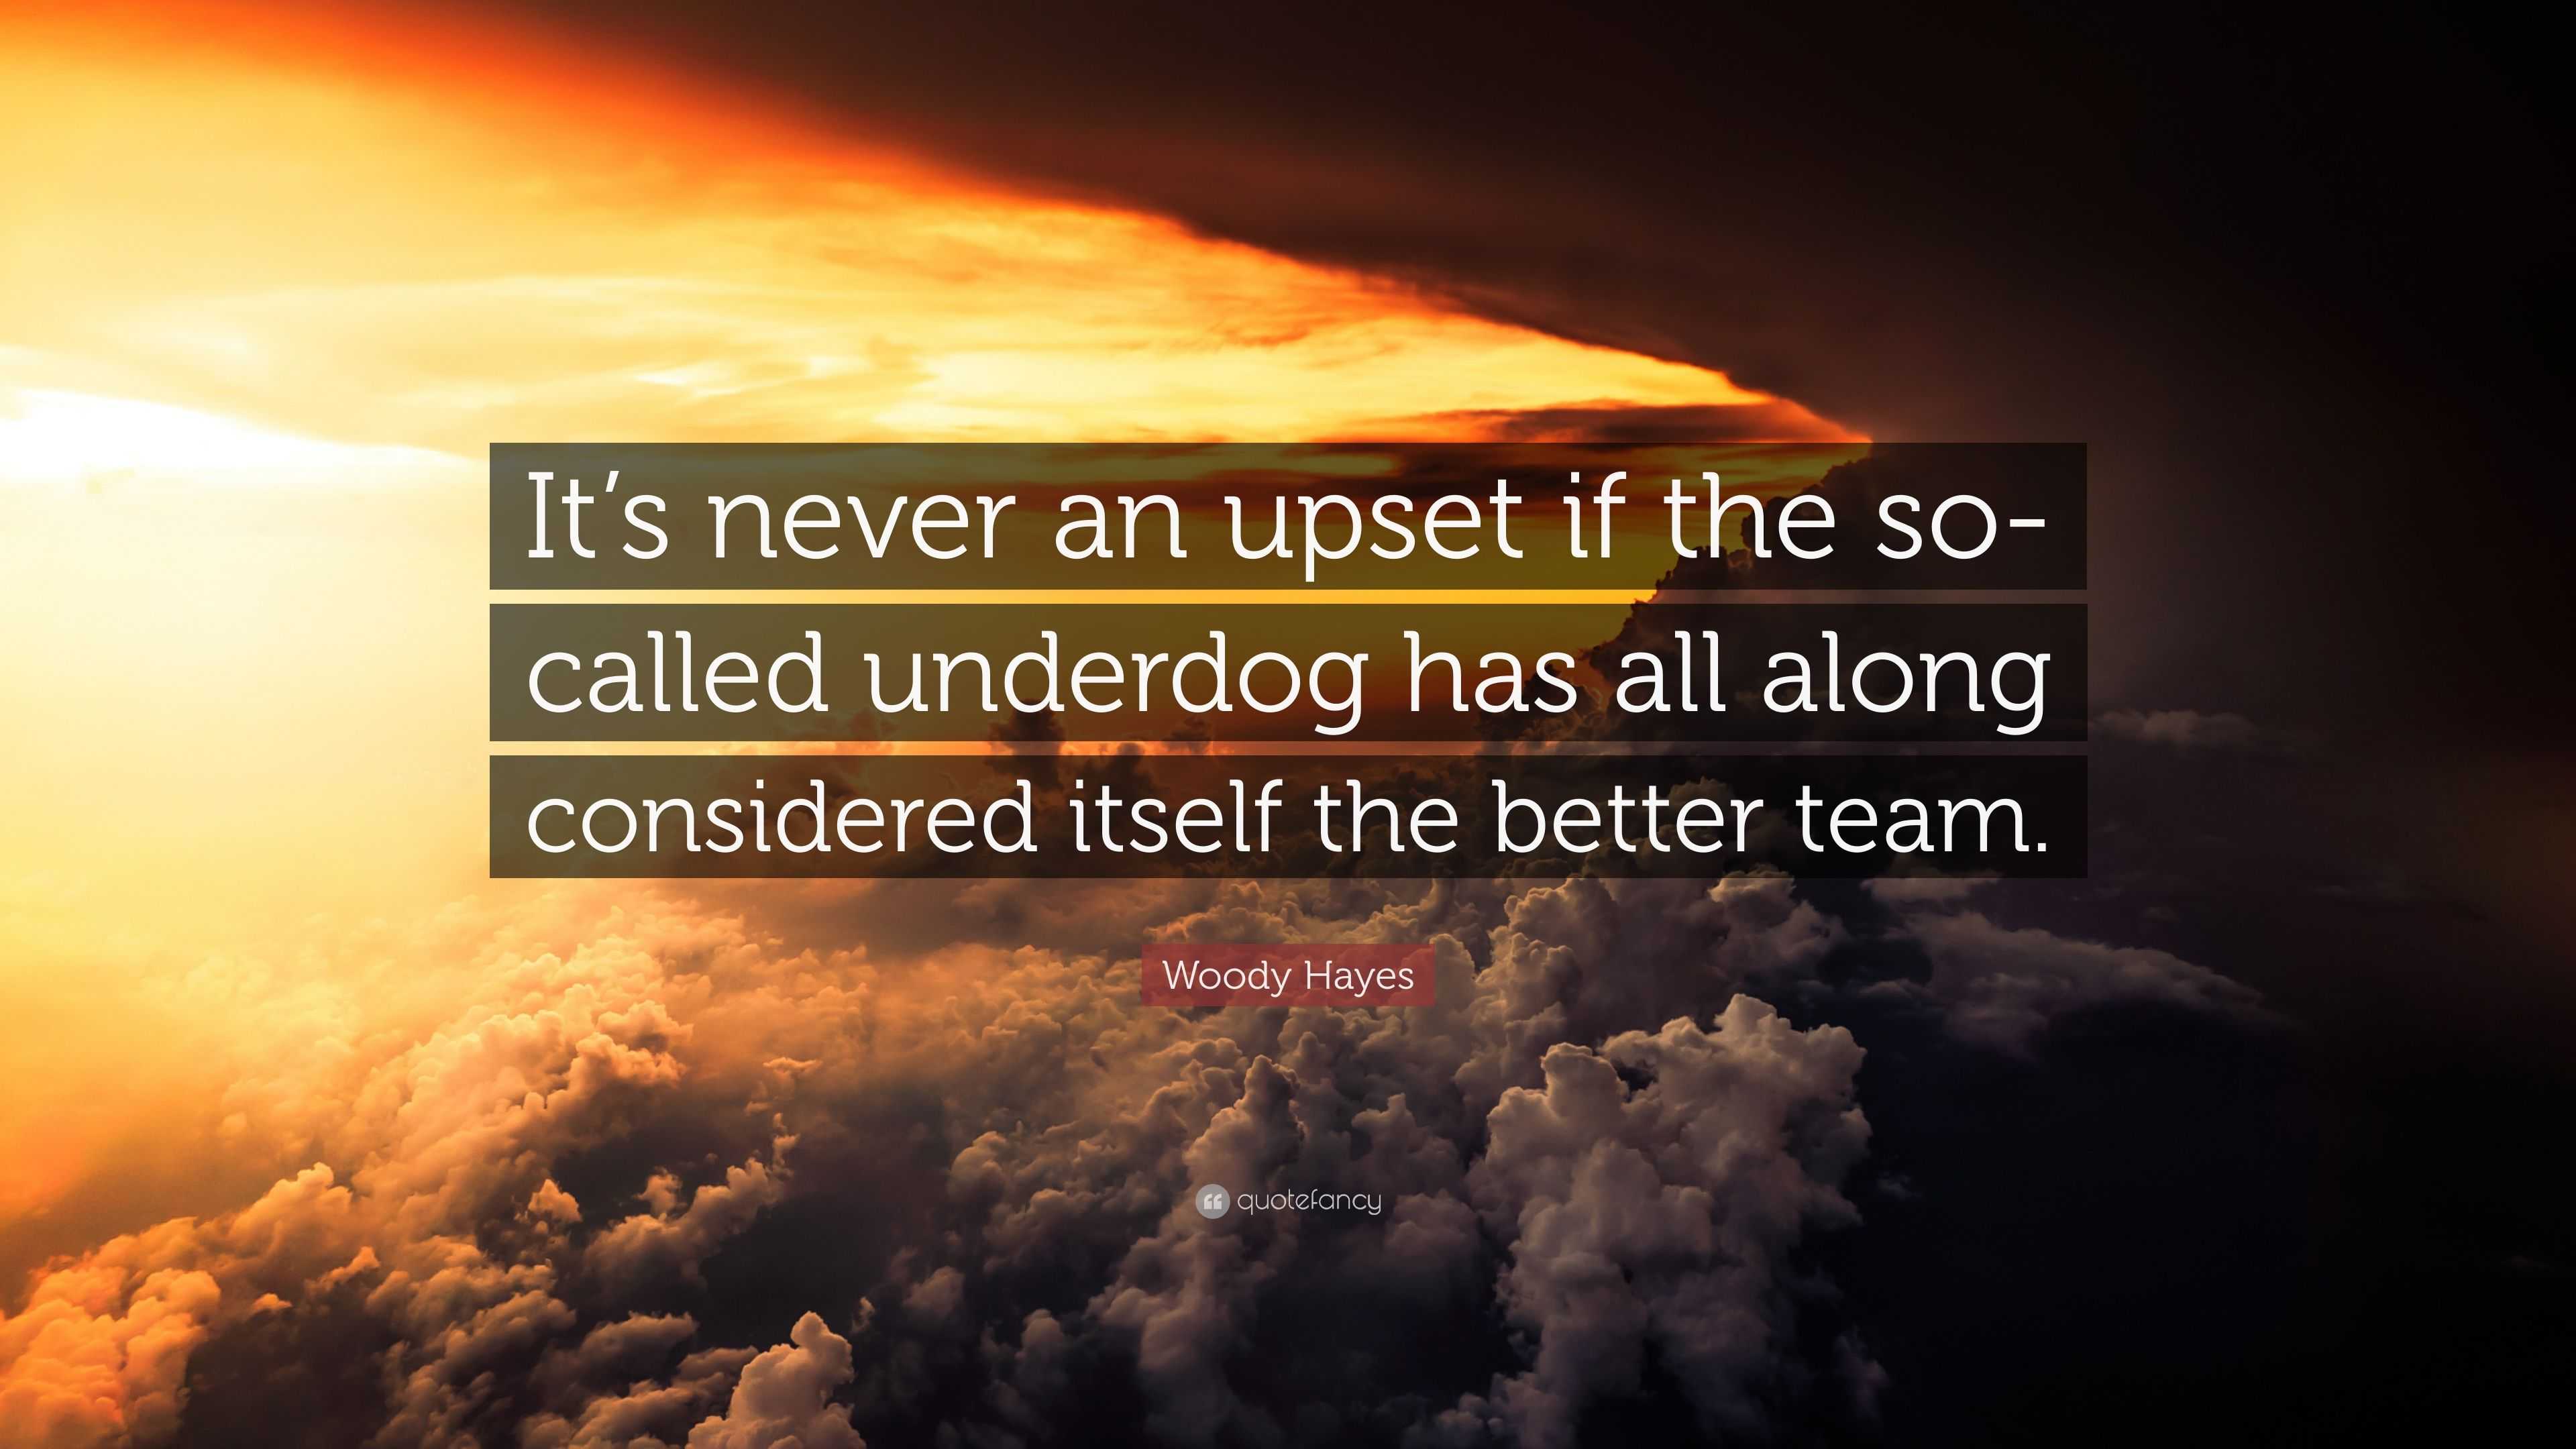 Woody Hayes Quote: “It’s never an upset if the so-called underdog has